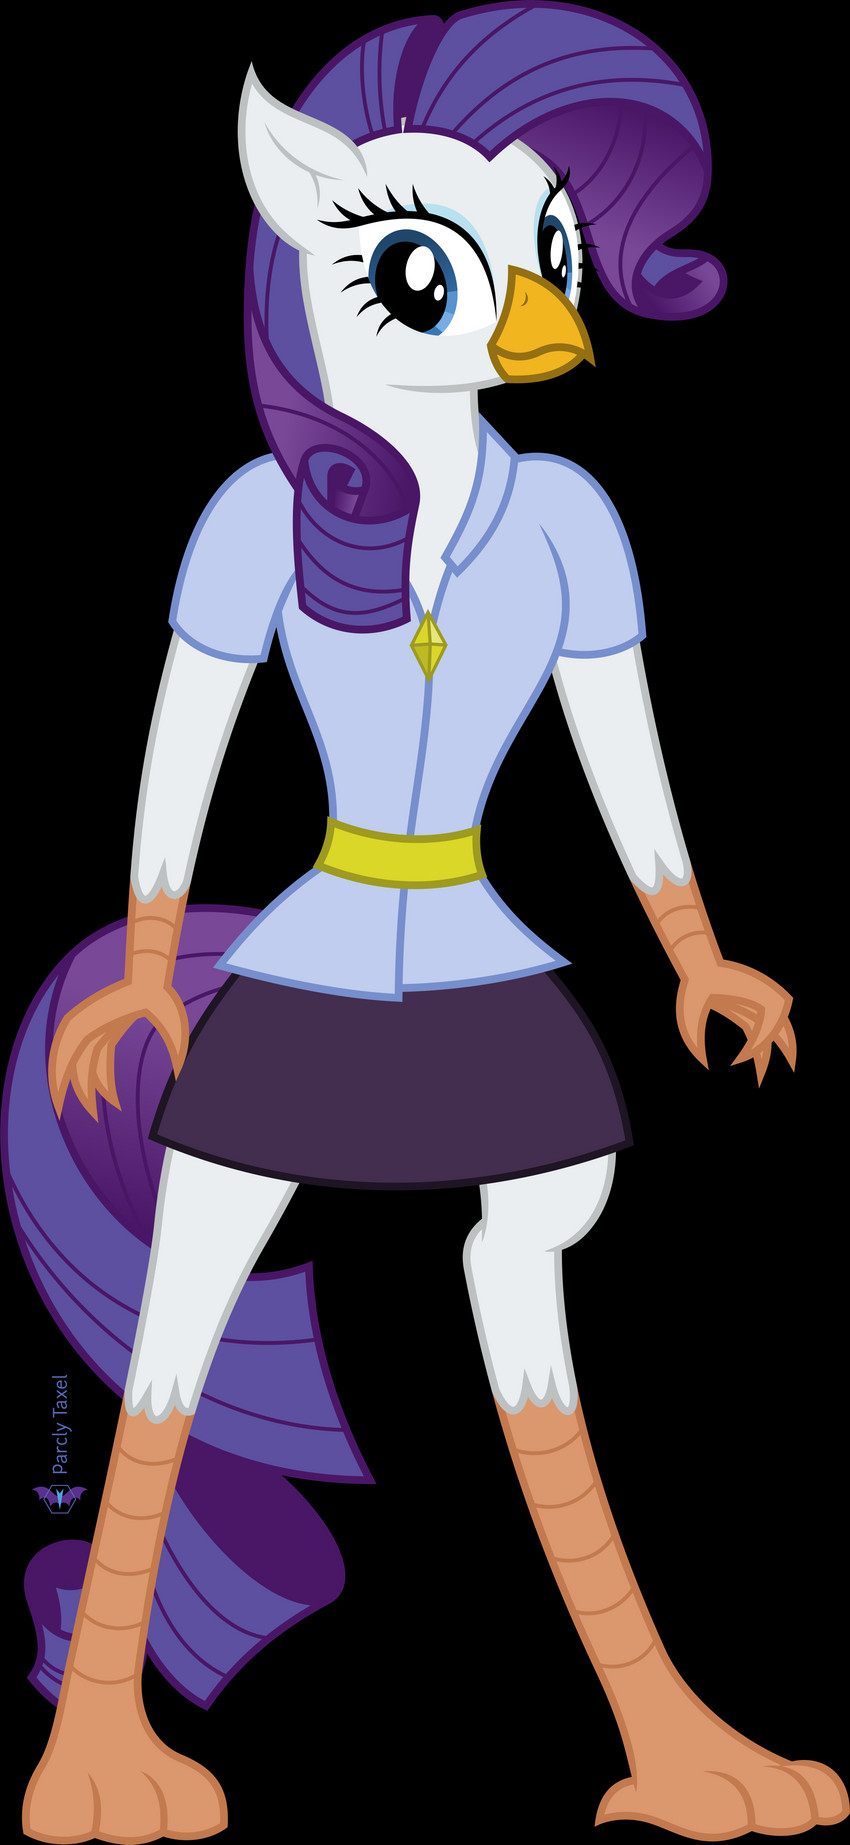 rarity (friendship is magic and etc) created by parclytaxel